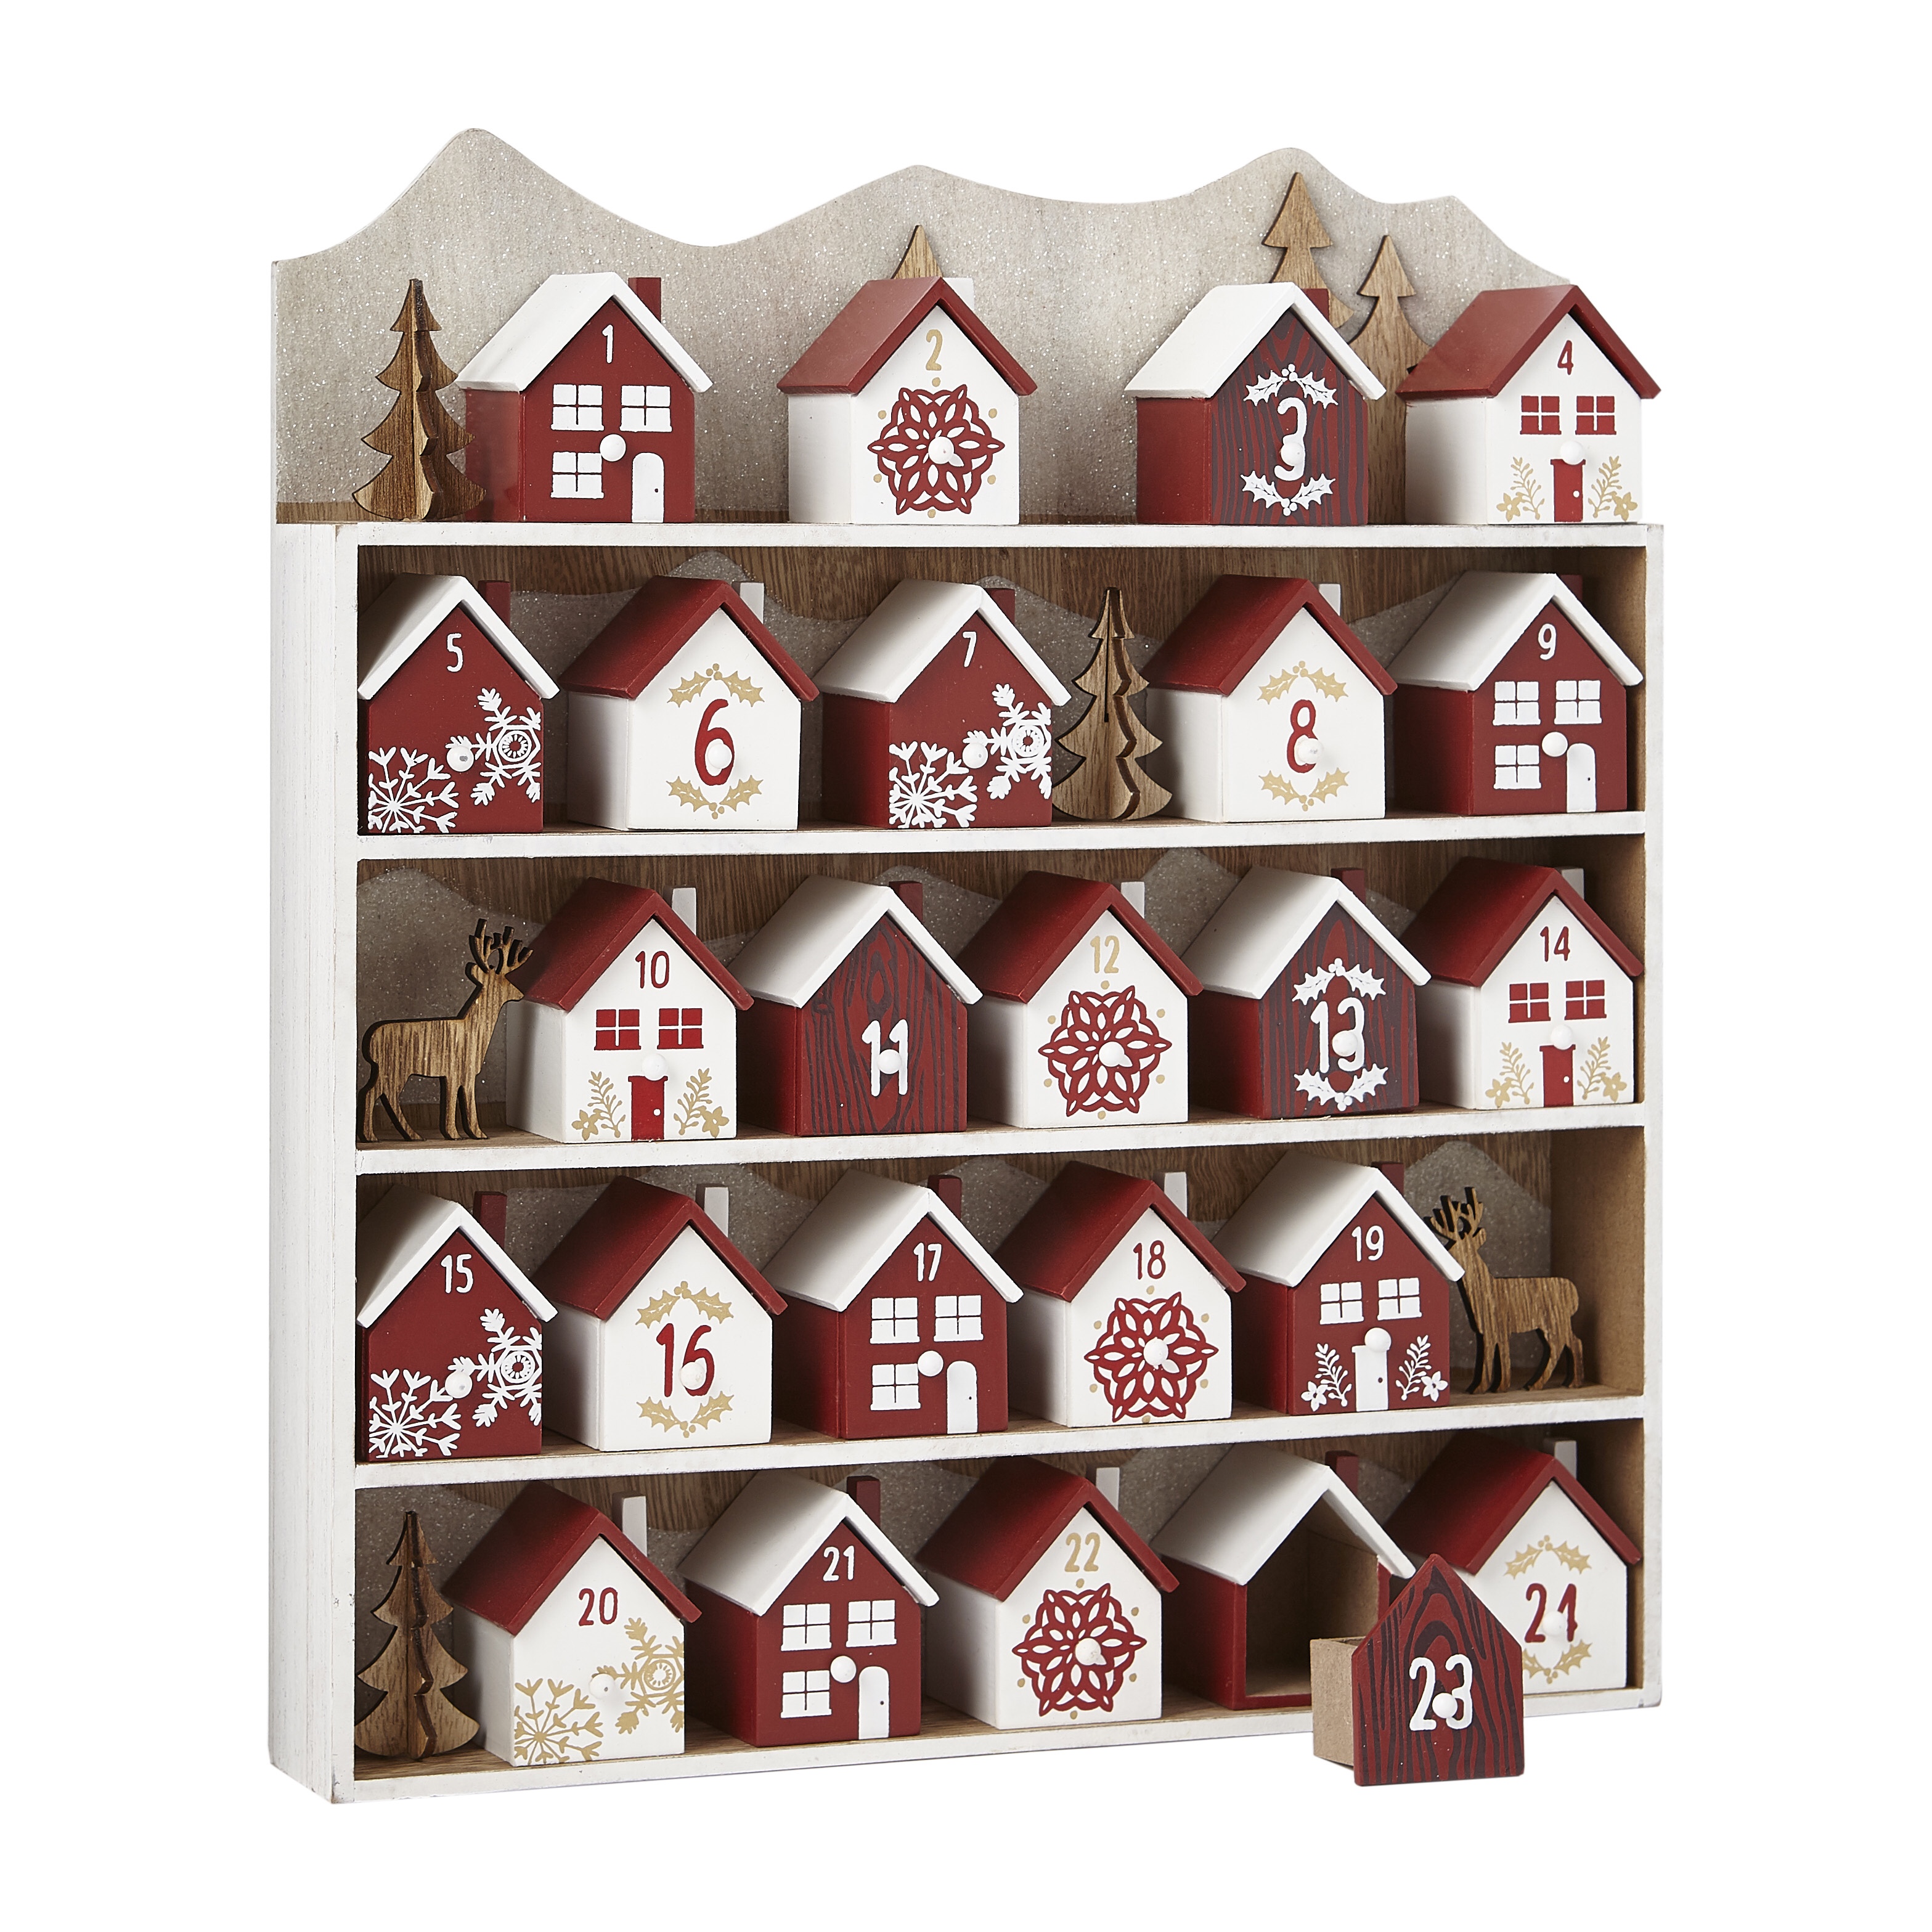 6 Holiday Advent Calendars You’ll Want